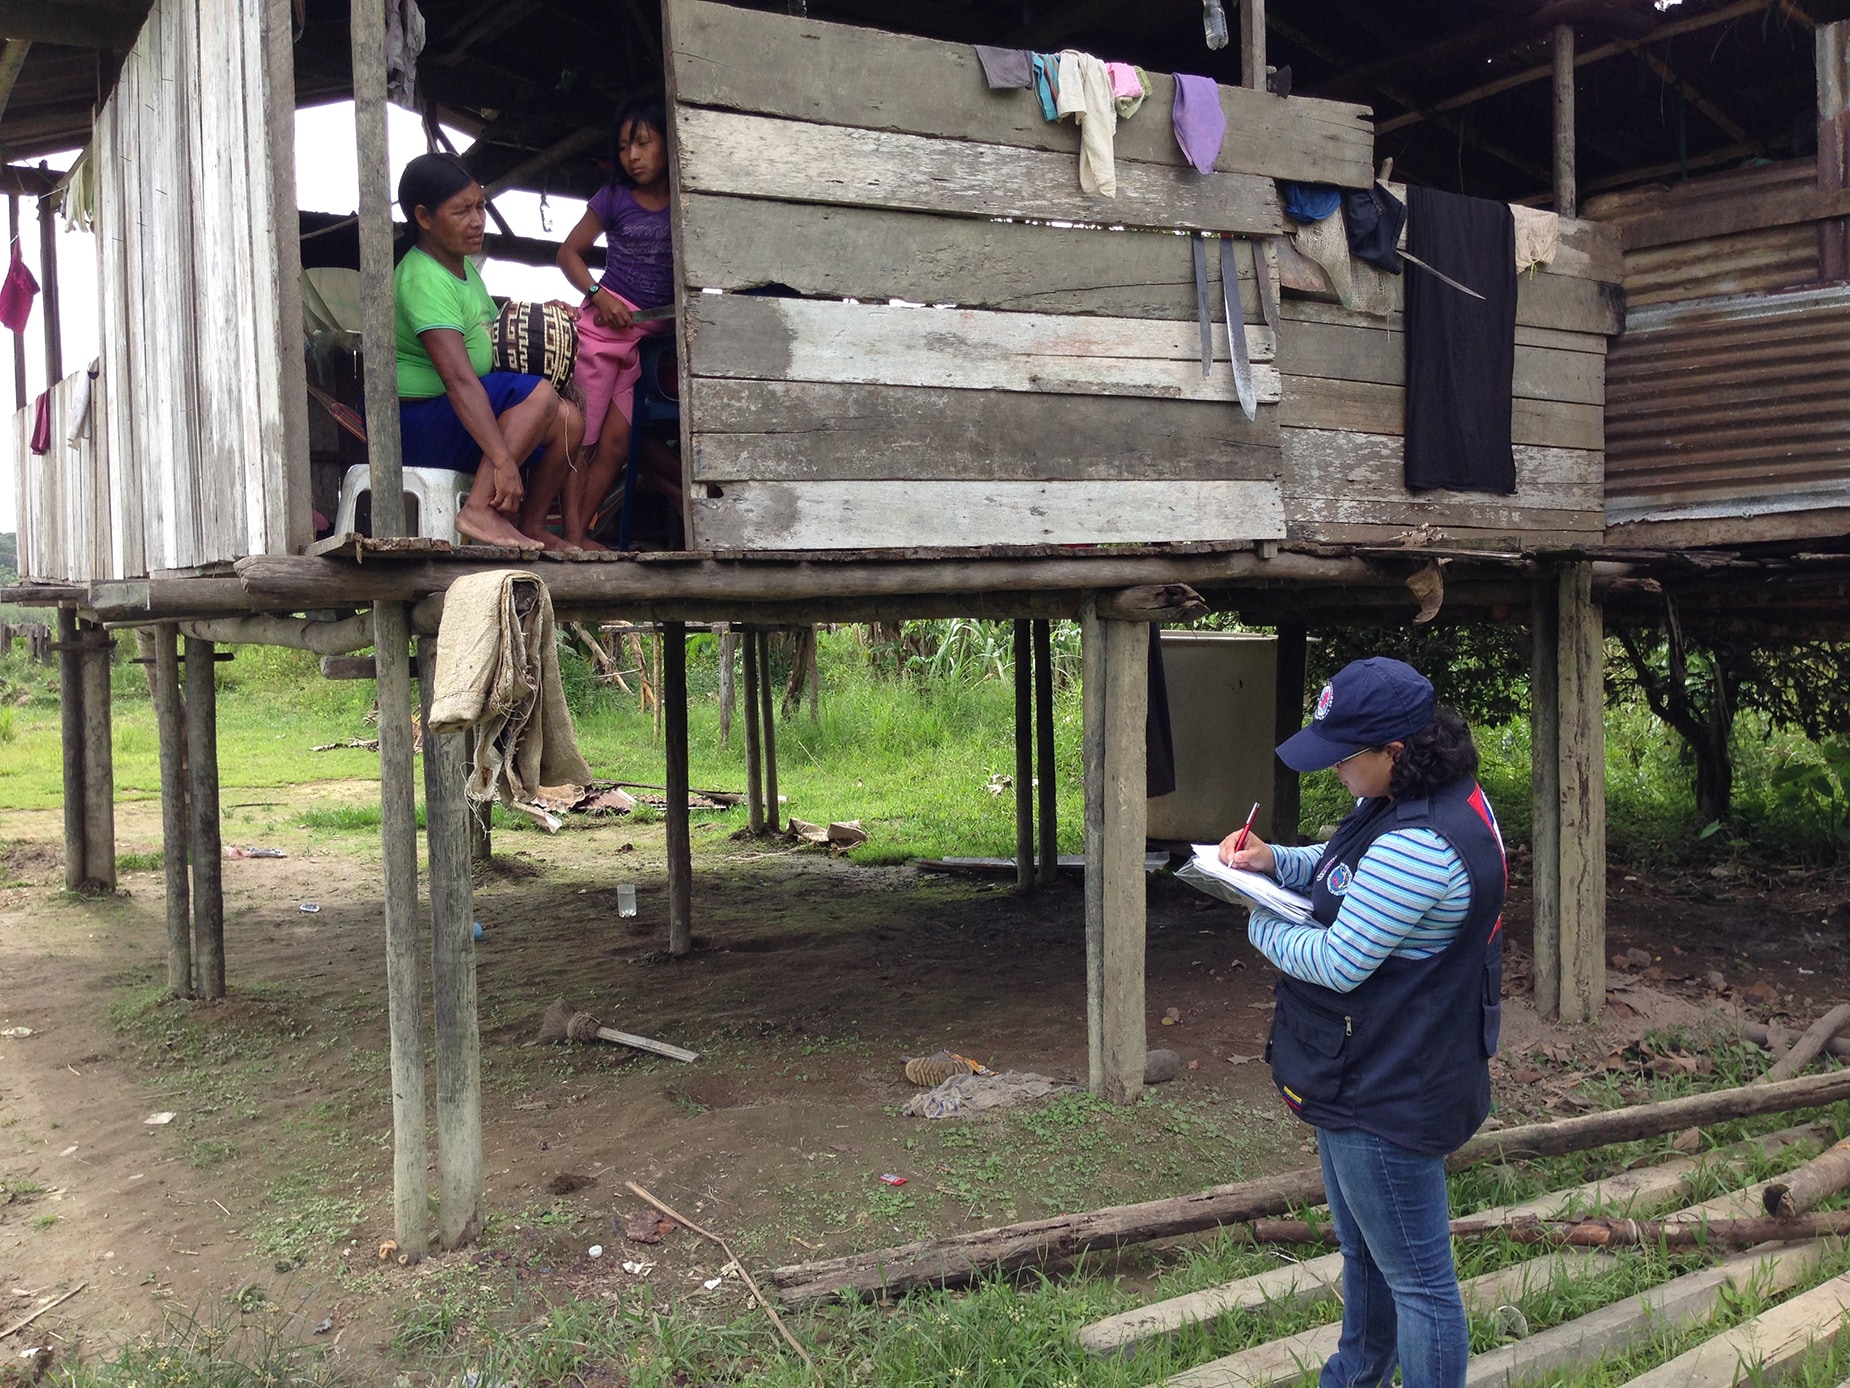 Field investigators screen indigenous communities in rural Colombia for Zika virus and other health concerns. Photo: Diana Marcela Walteros Acero, Colombia FETP and TEPHINET